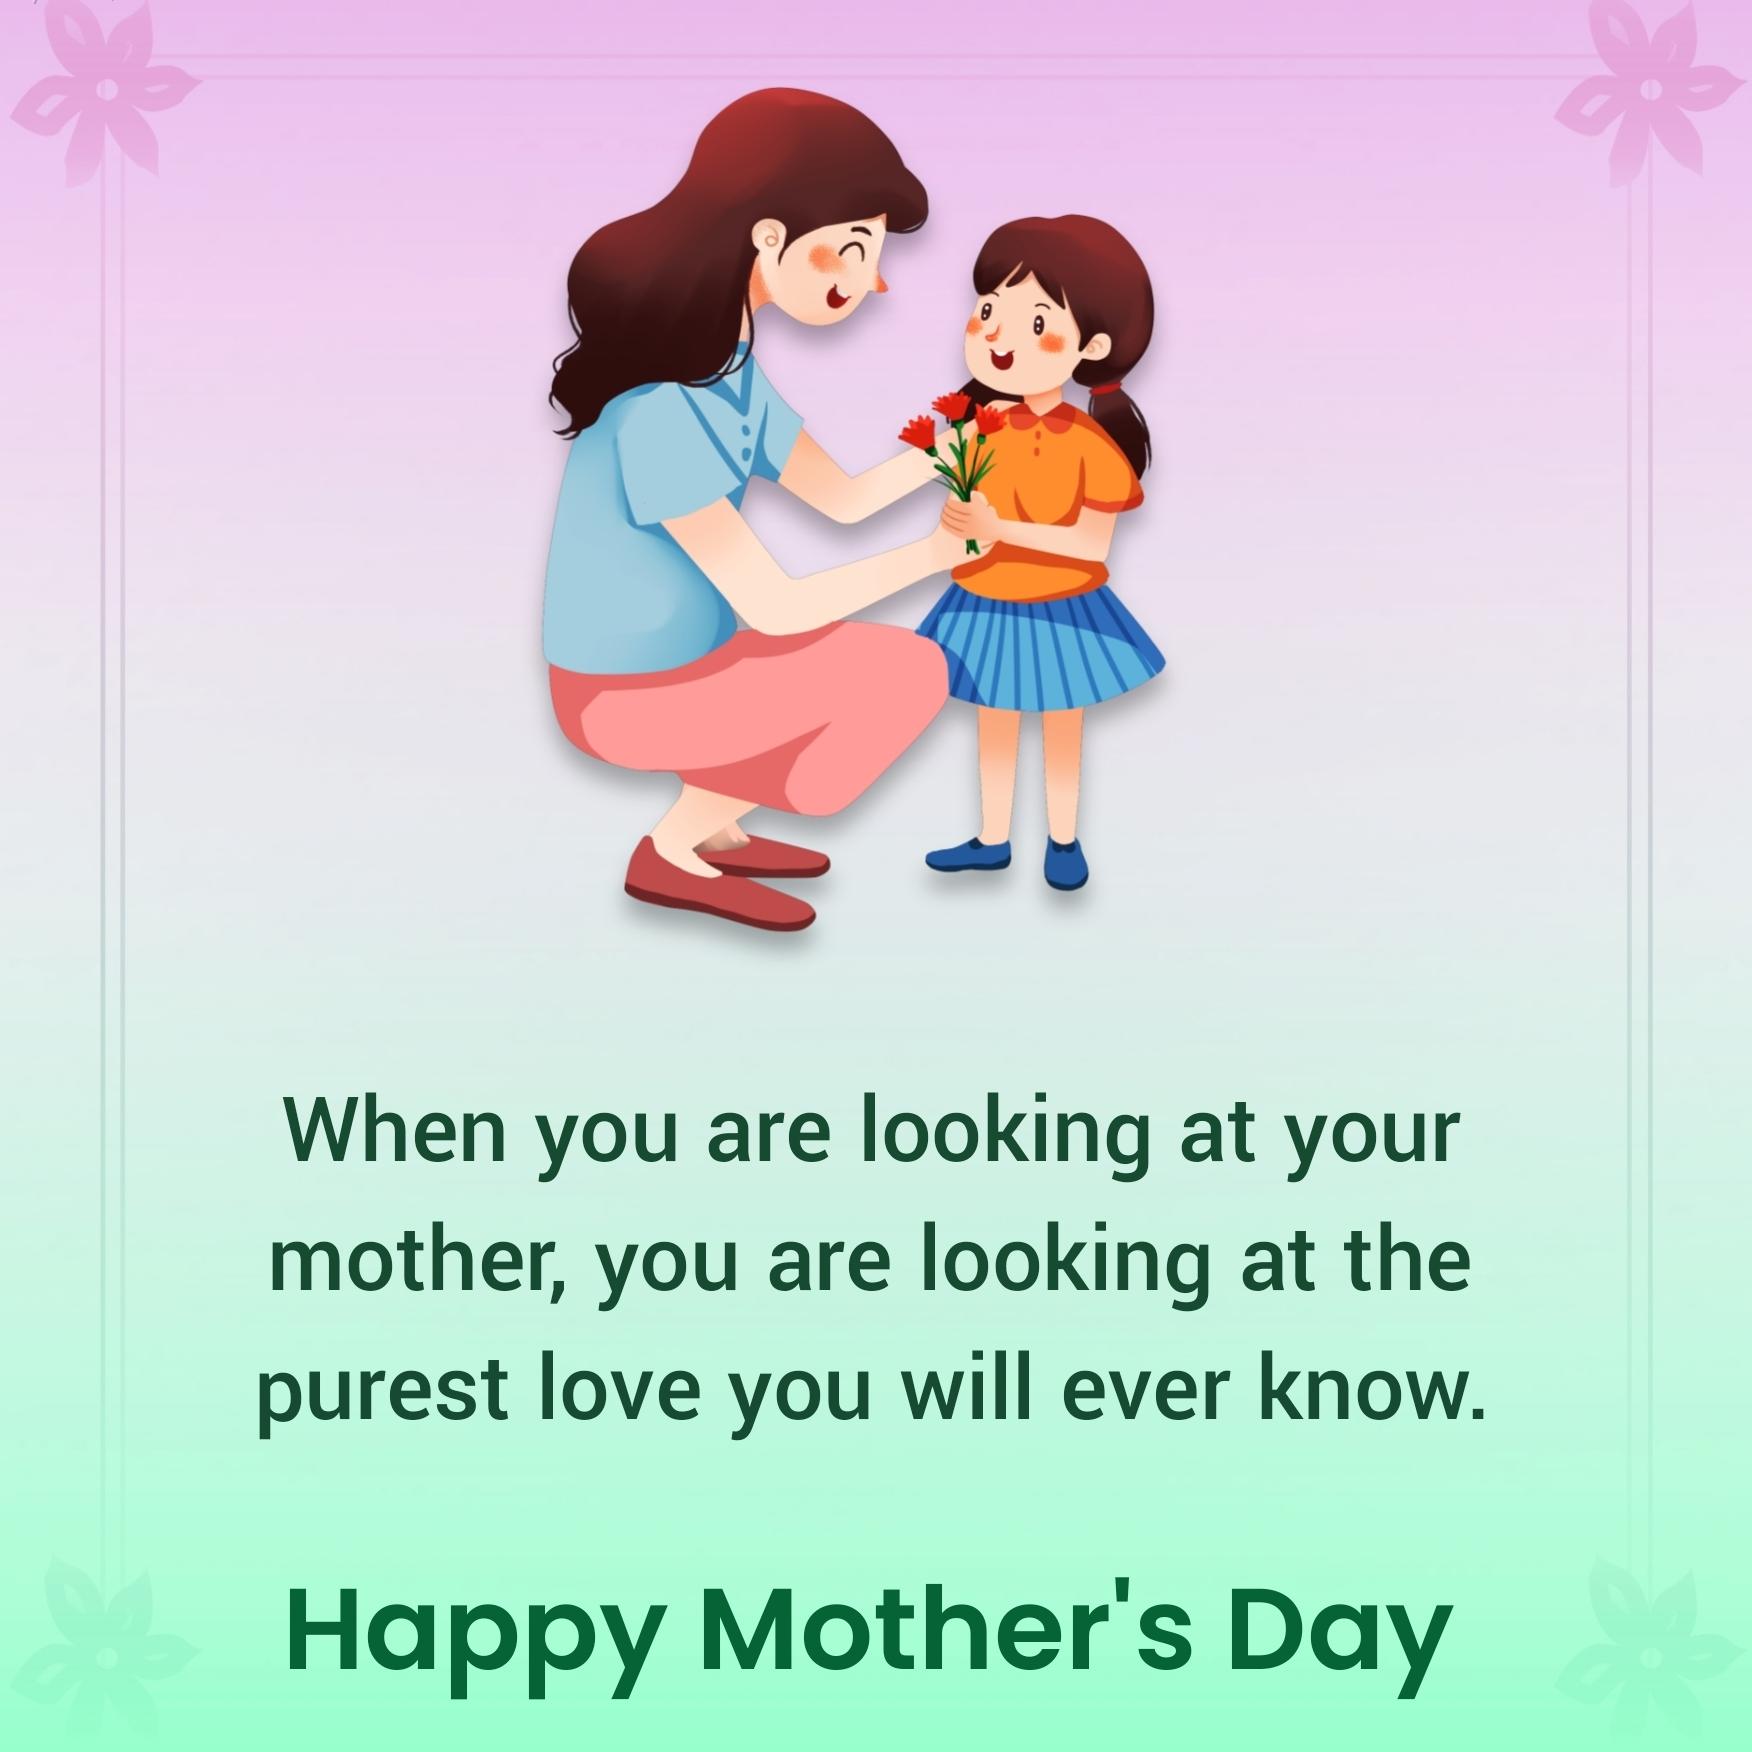 When you are looking at your mother you are looking at the purest love